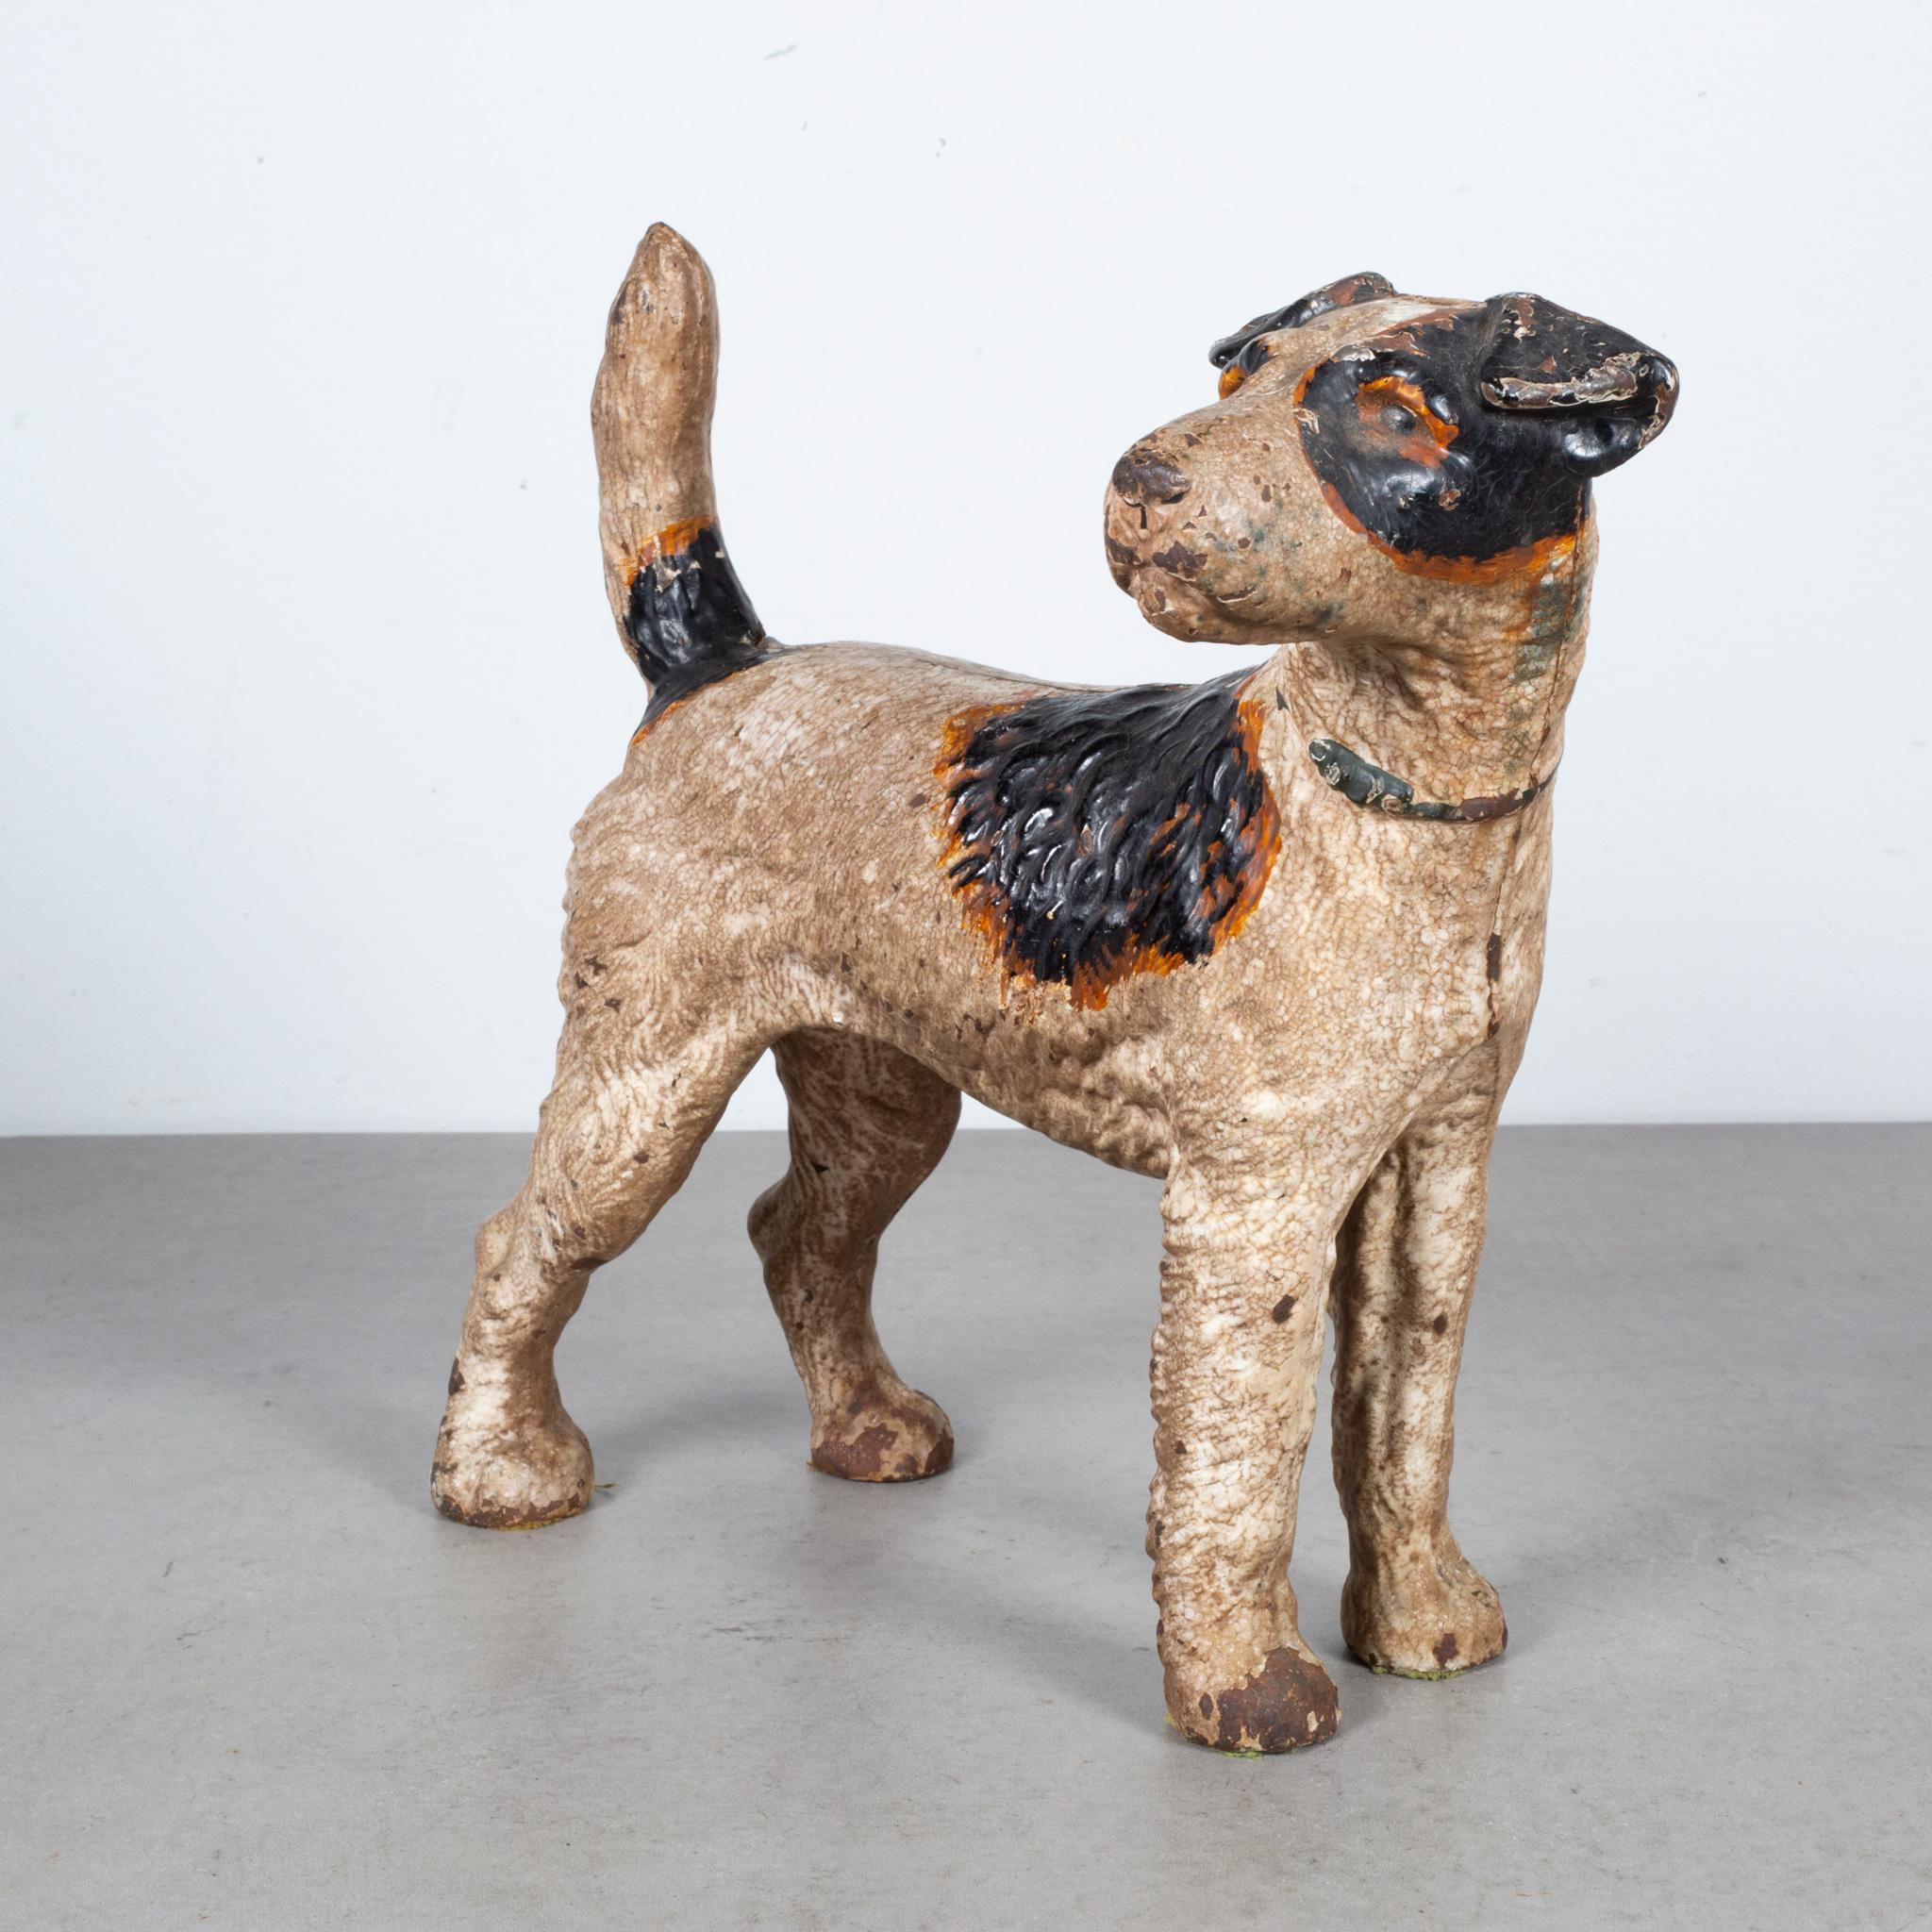 About

An original cast iron Terrier doorstop manufactured by the Hubley Manufacturing Company in Lancaster Pennsylvania USA. The piece has retained its original hand painted finish and is in excellent condition with the appropriate patina for its